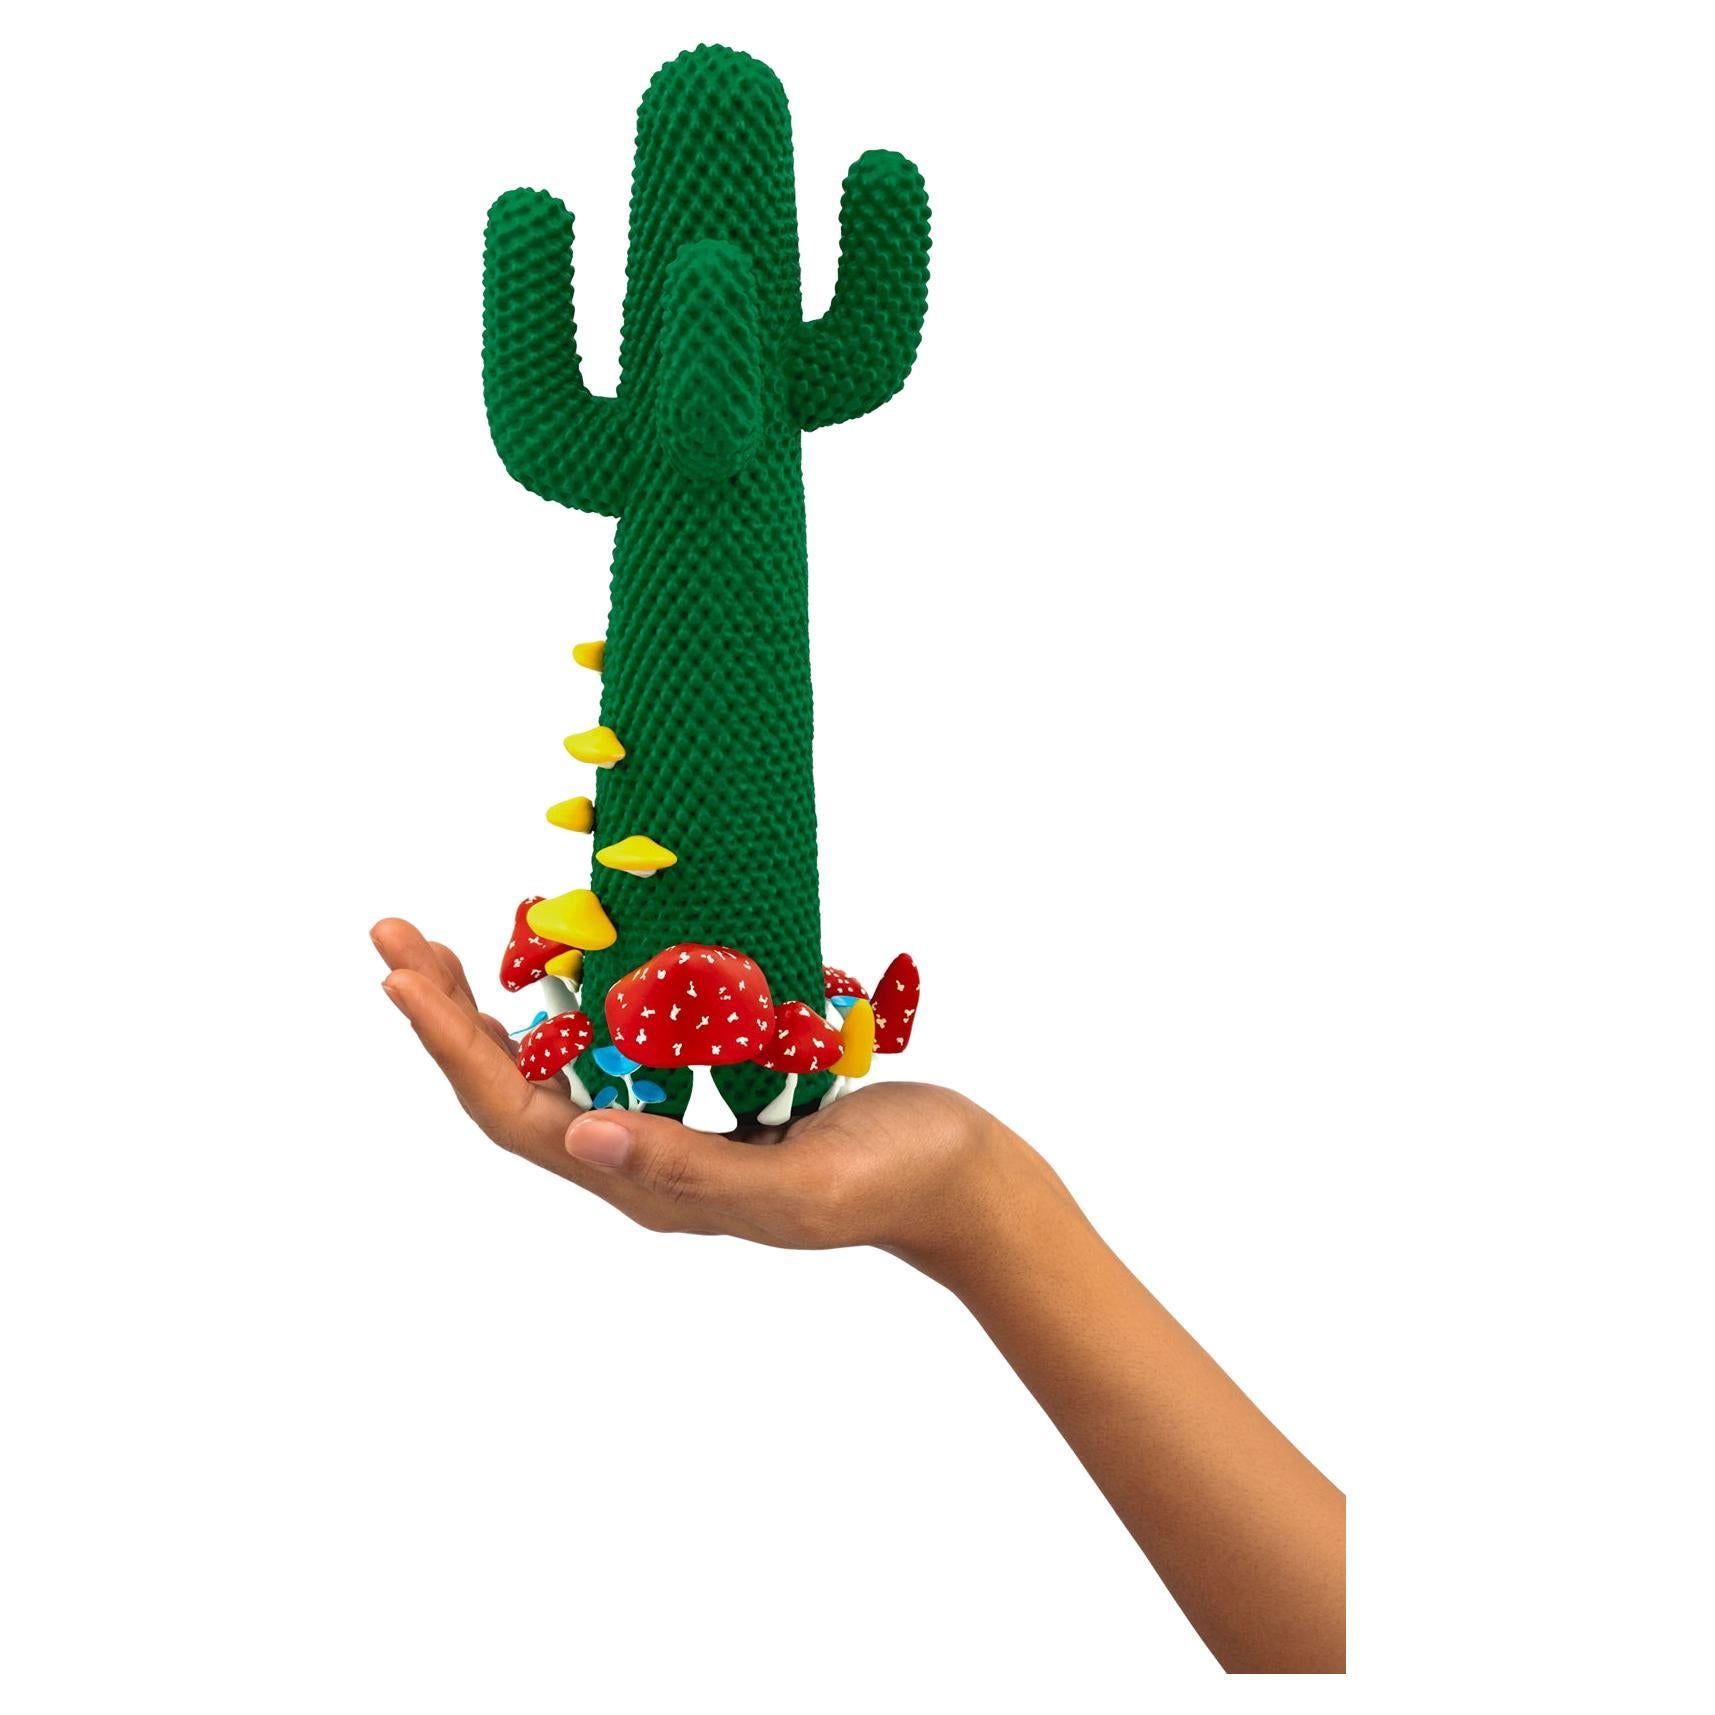 Limited Edition #32/99

Gufram presents the miniaturised version of the Shroom CACTUS® created in collaboration with A$AP Rocky and the artist’s new design studio HOMMEMADE Exactly as the real-size Shroom CACTUS®, the new Guframini piece features